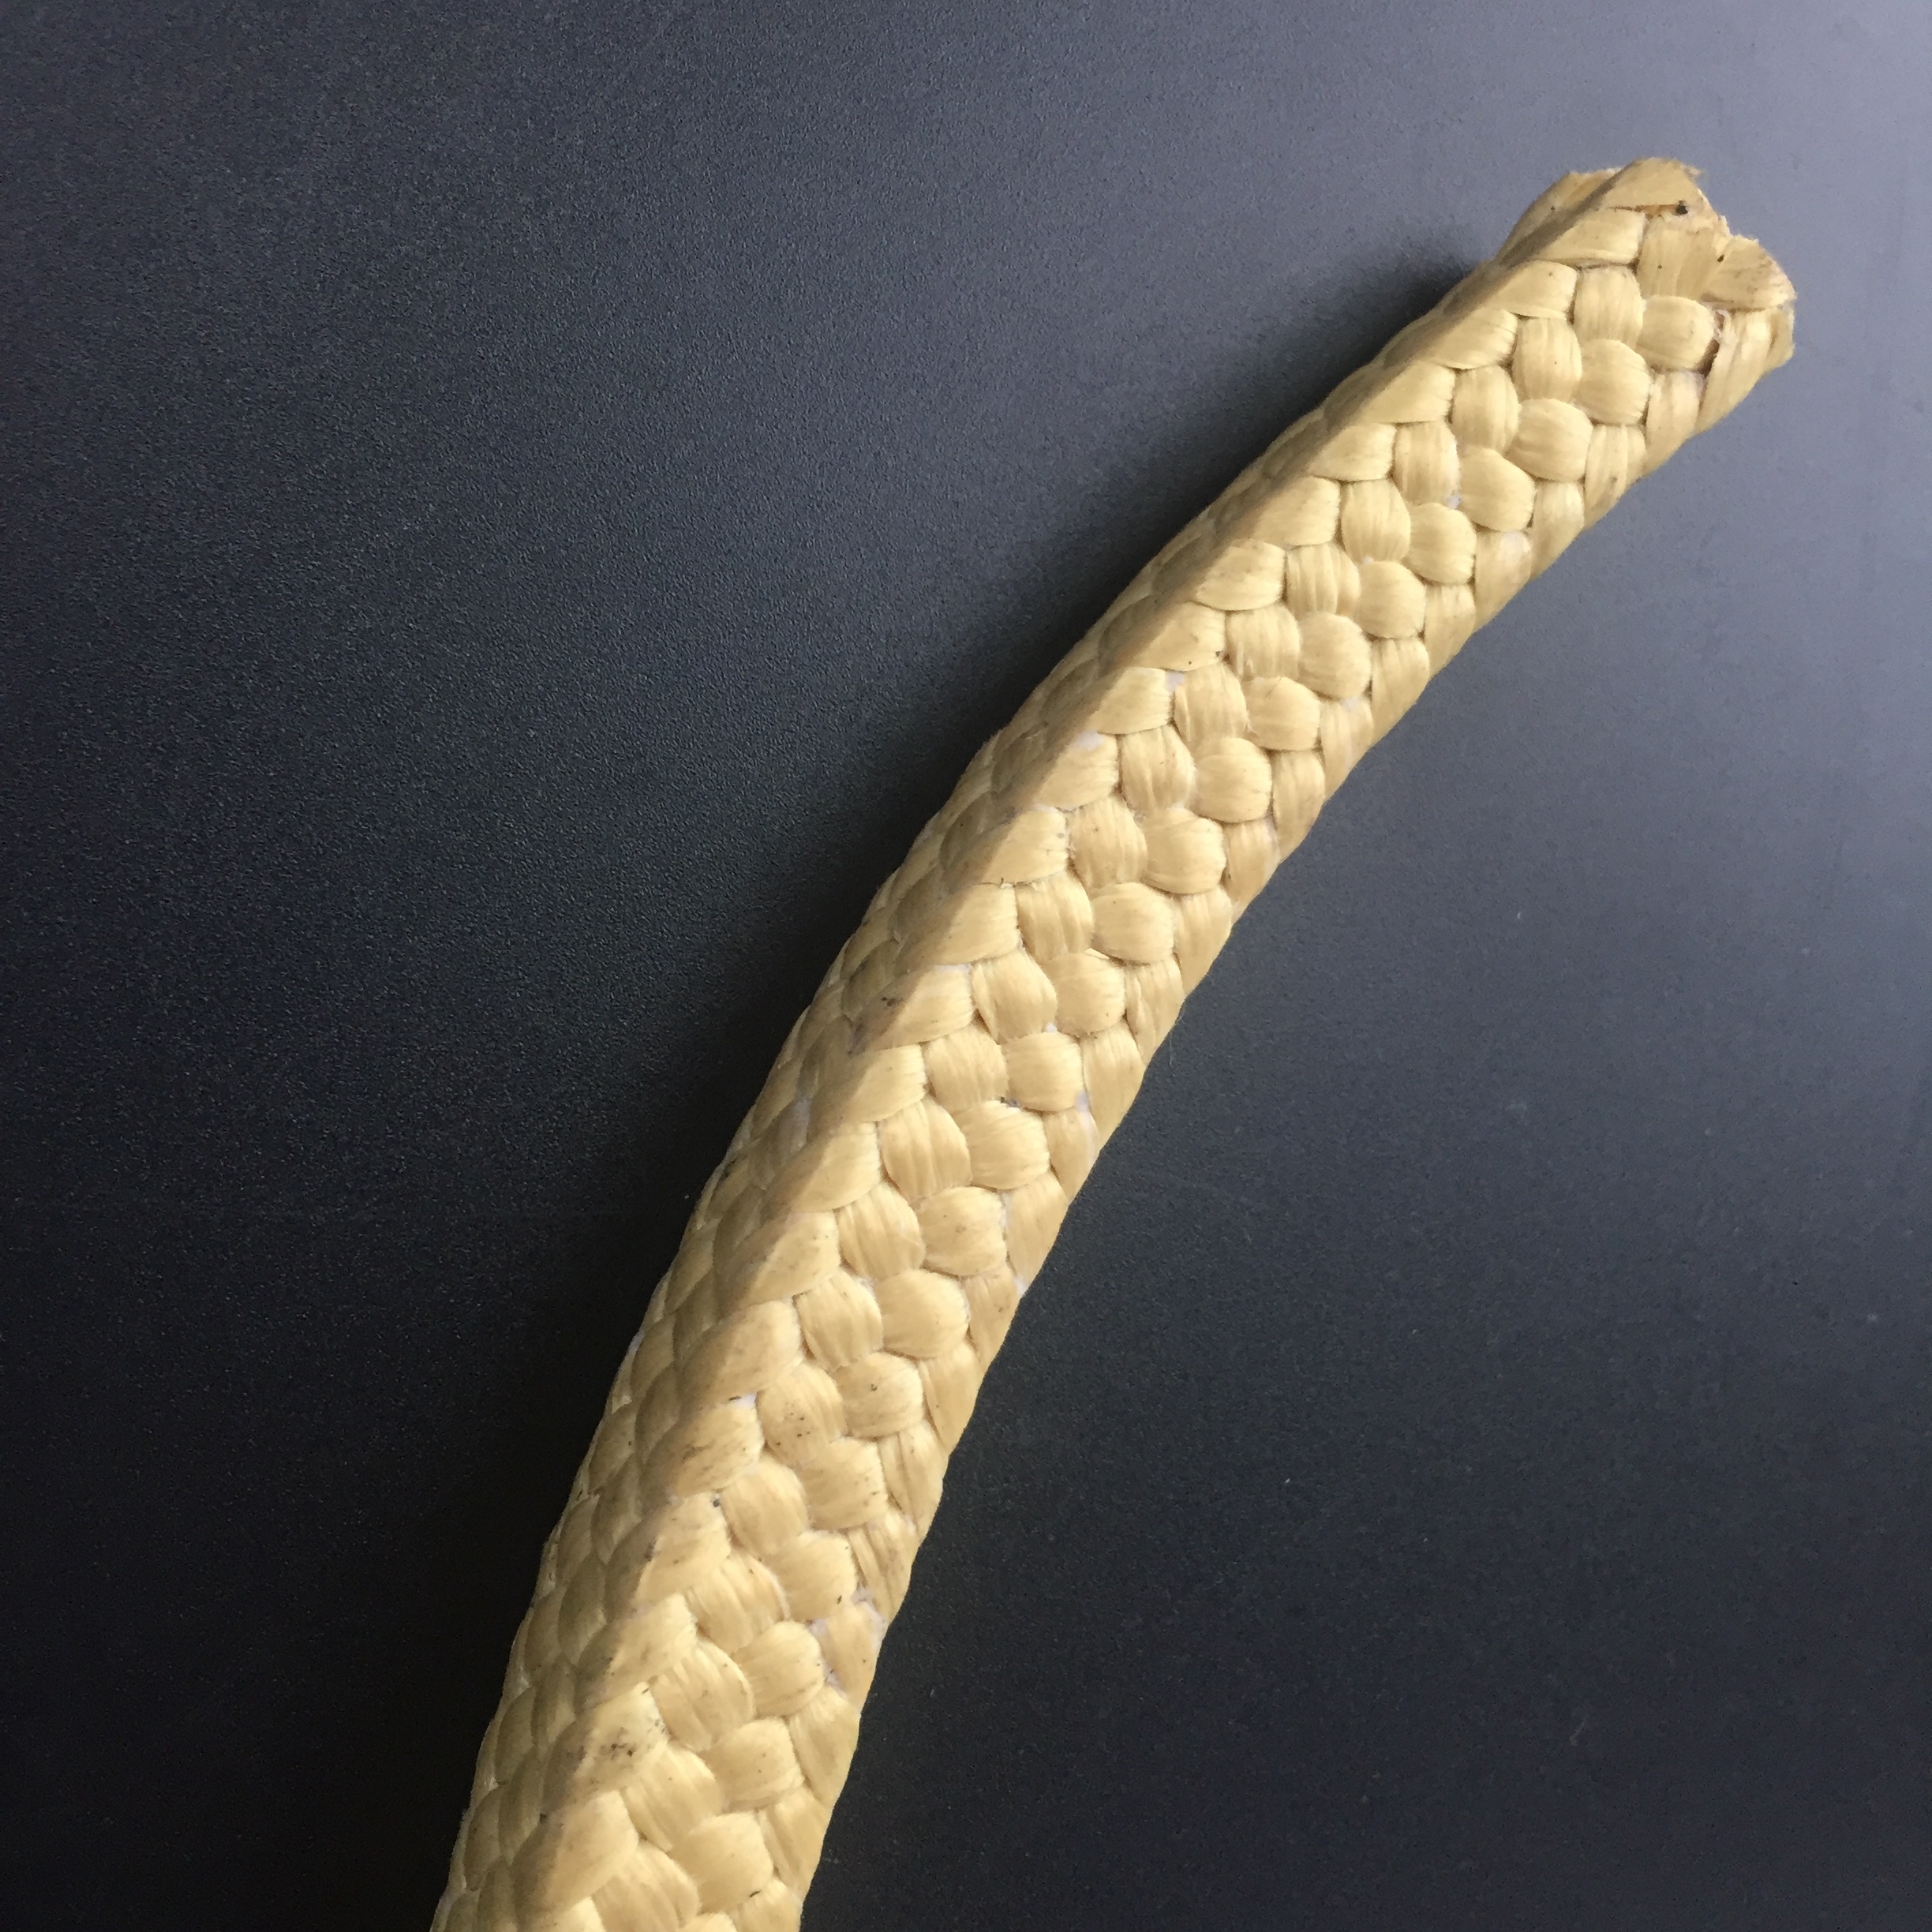 What are the characteristics of aramid fiber packing?